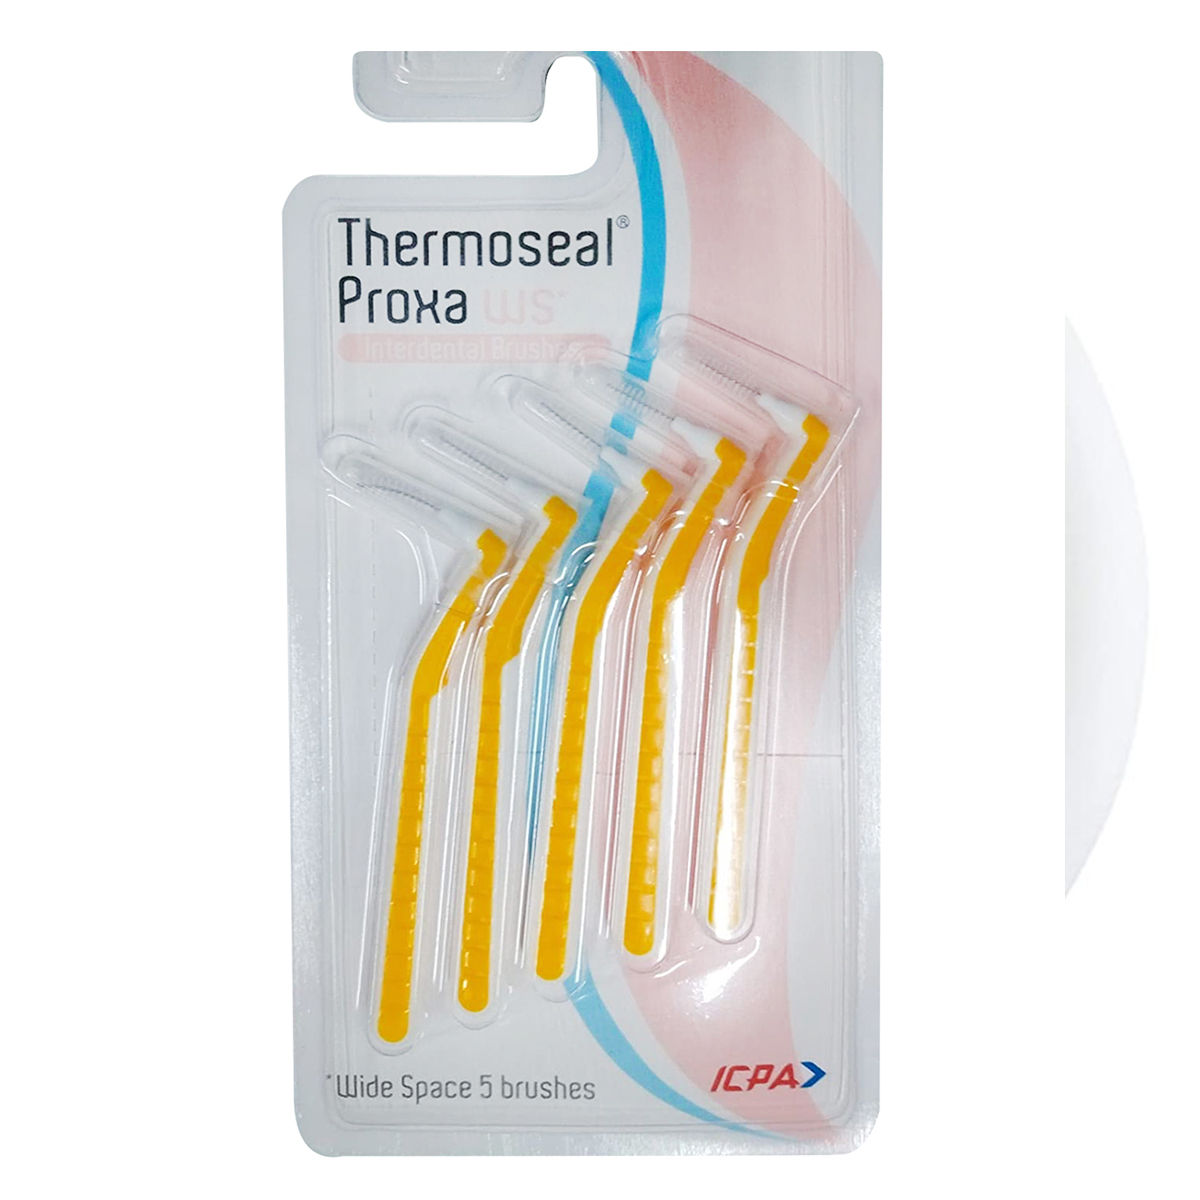 Buy Thermoseal Proxa Wide Space Interdental Brushes, 5 Count Online